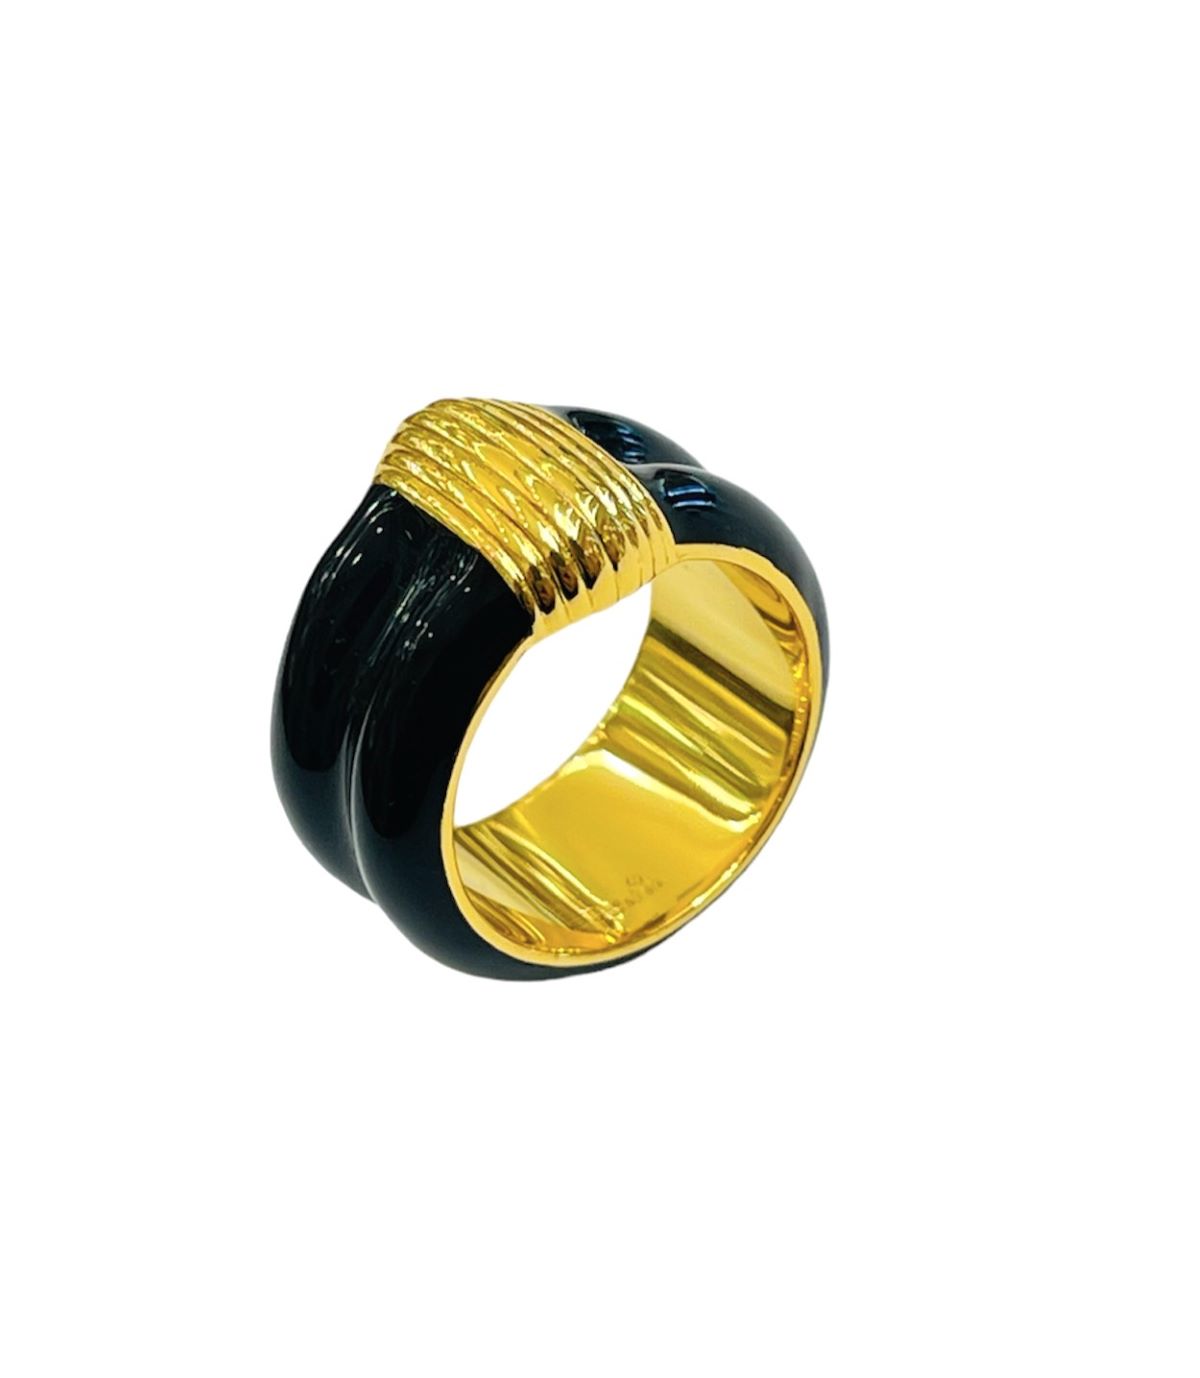 RING THICK PAINTED BLACK